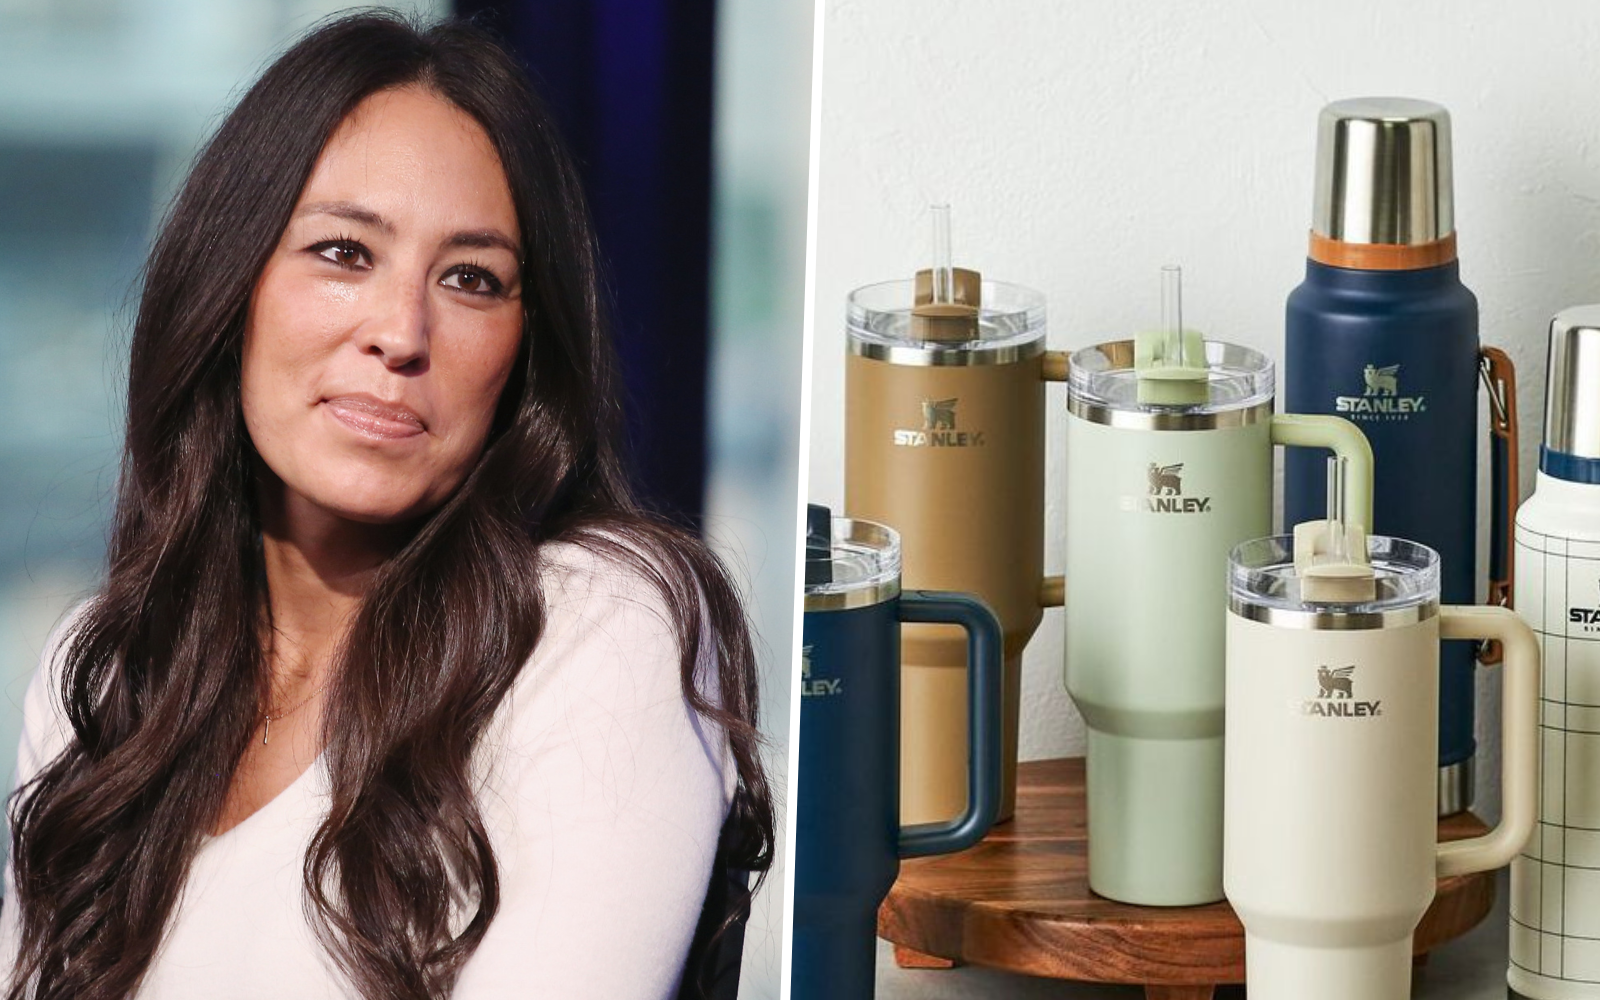 Joanna Gaines revealed a muted twist on the Stanley Cup